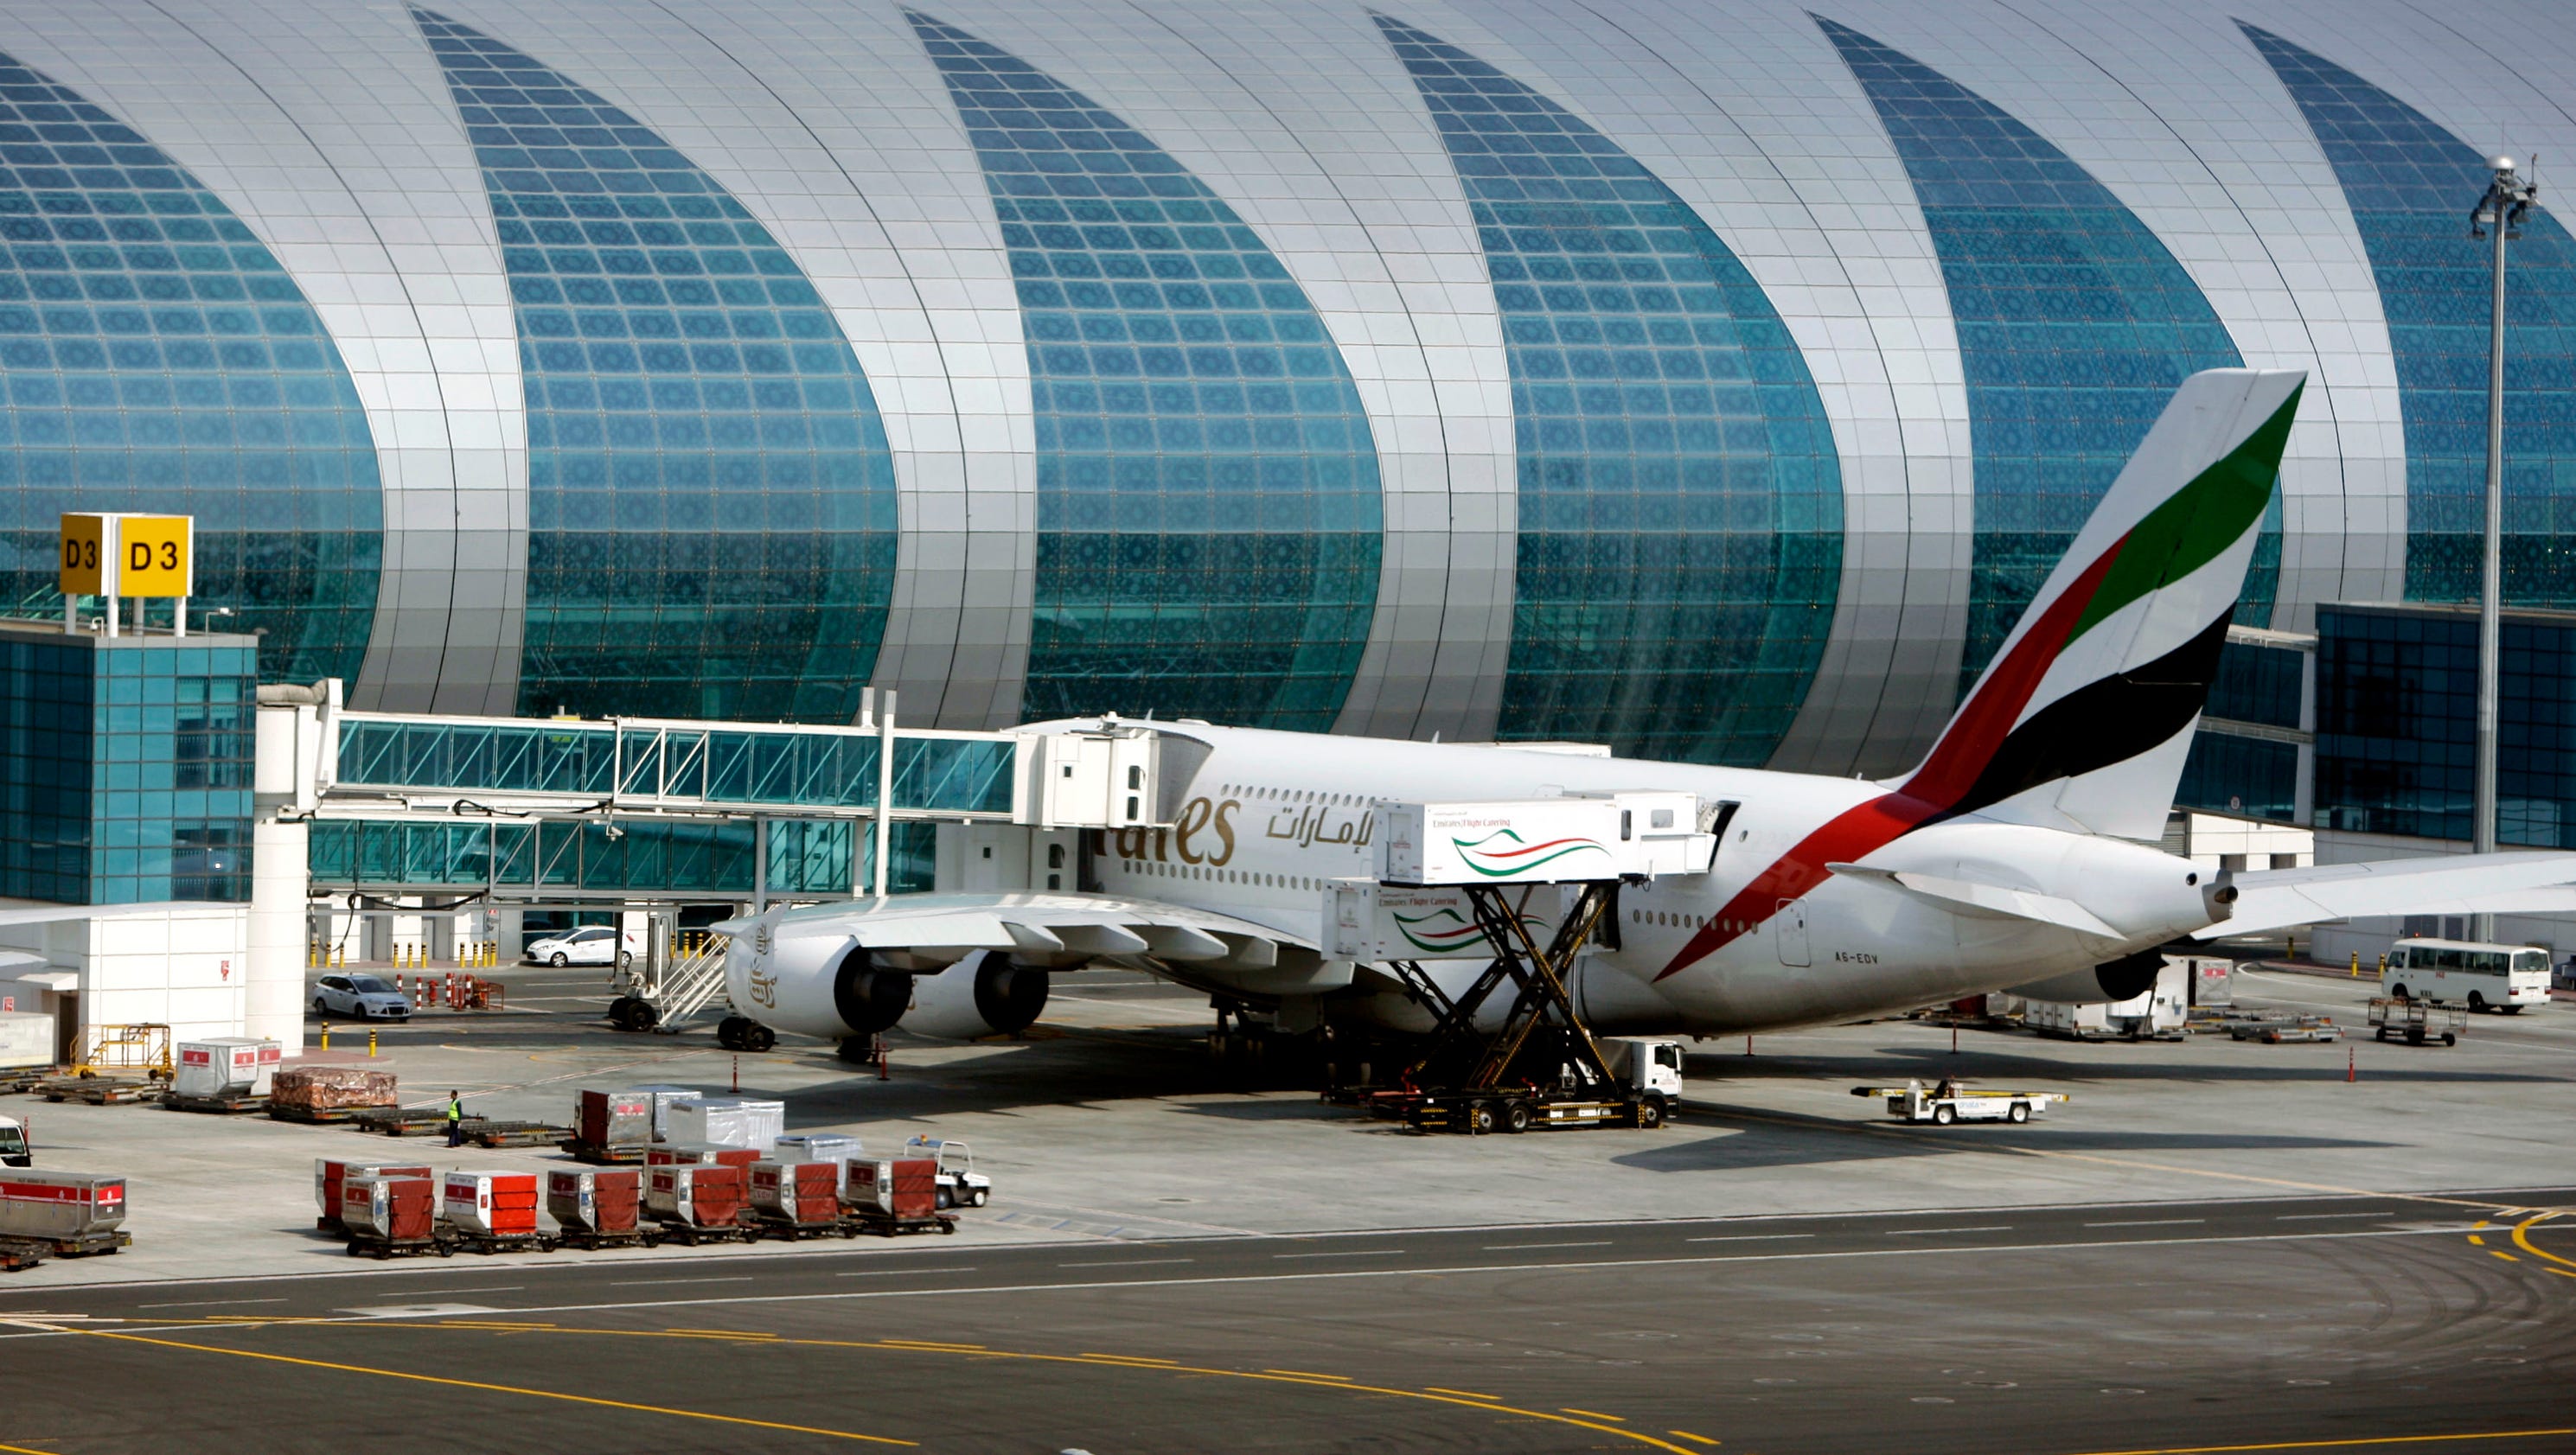 Dubai airport adds to 'world record' number of A380 gates